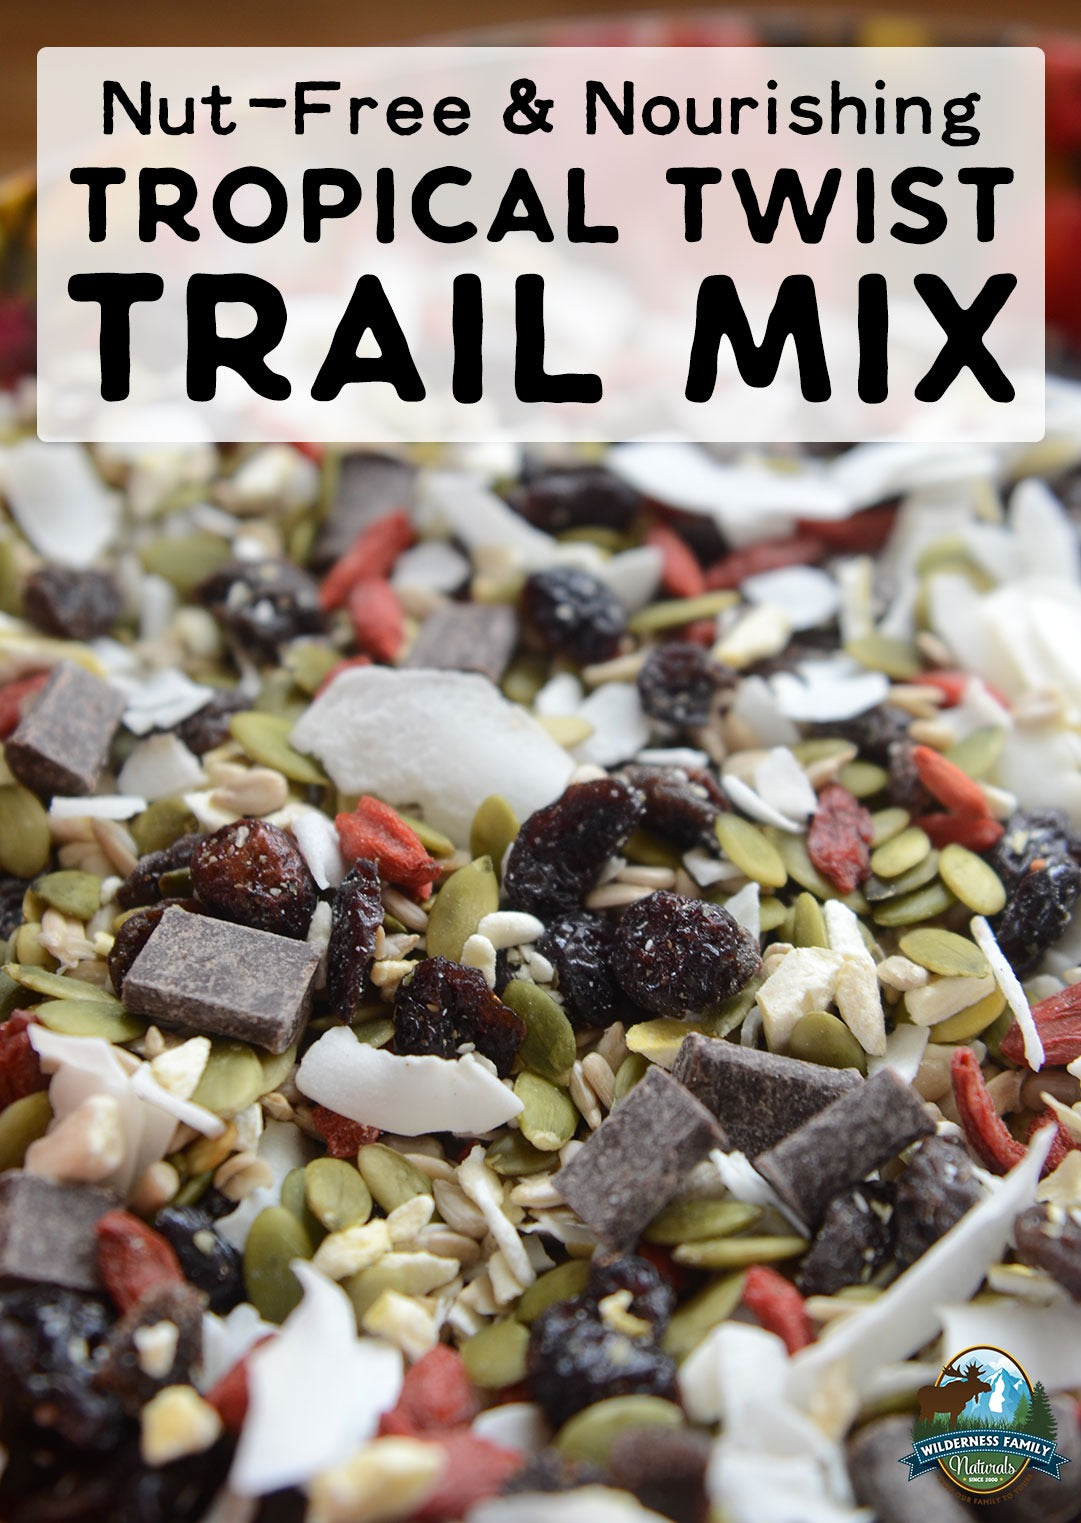 Nut-Free & Nourishing Tropical Twist Trail Mix | When store-bought trail mix is full of allergens like tree nuts and peanuts, make your own nut-free mix! With superfood goodness and no refined sugar, this Tropical Twist Trail Mix is awesome for camping, hiking, RVing, or just fun summer snacking! | WildernessFamilyNaturals.com